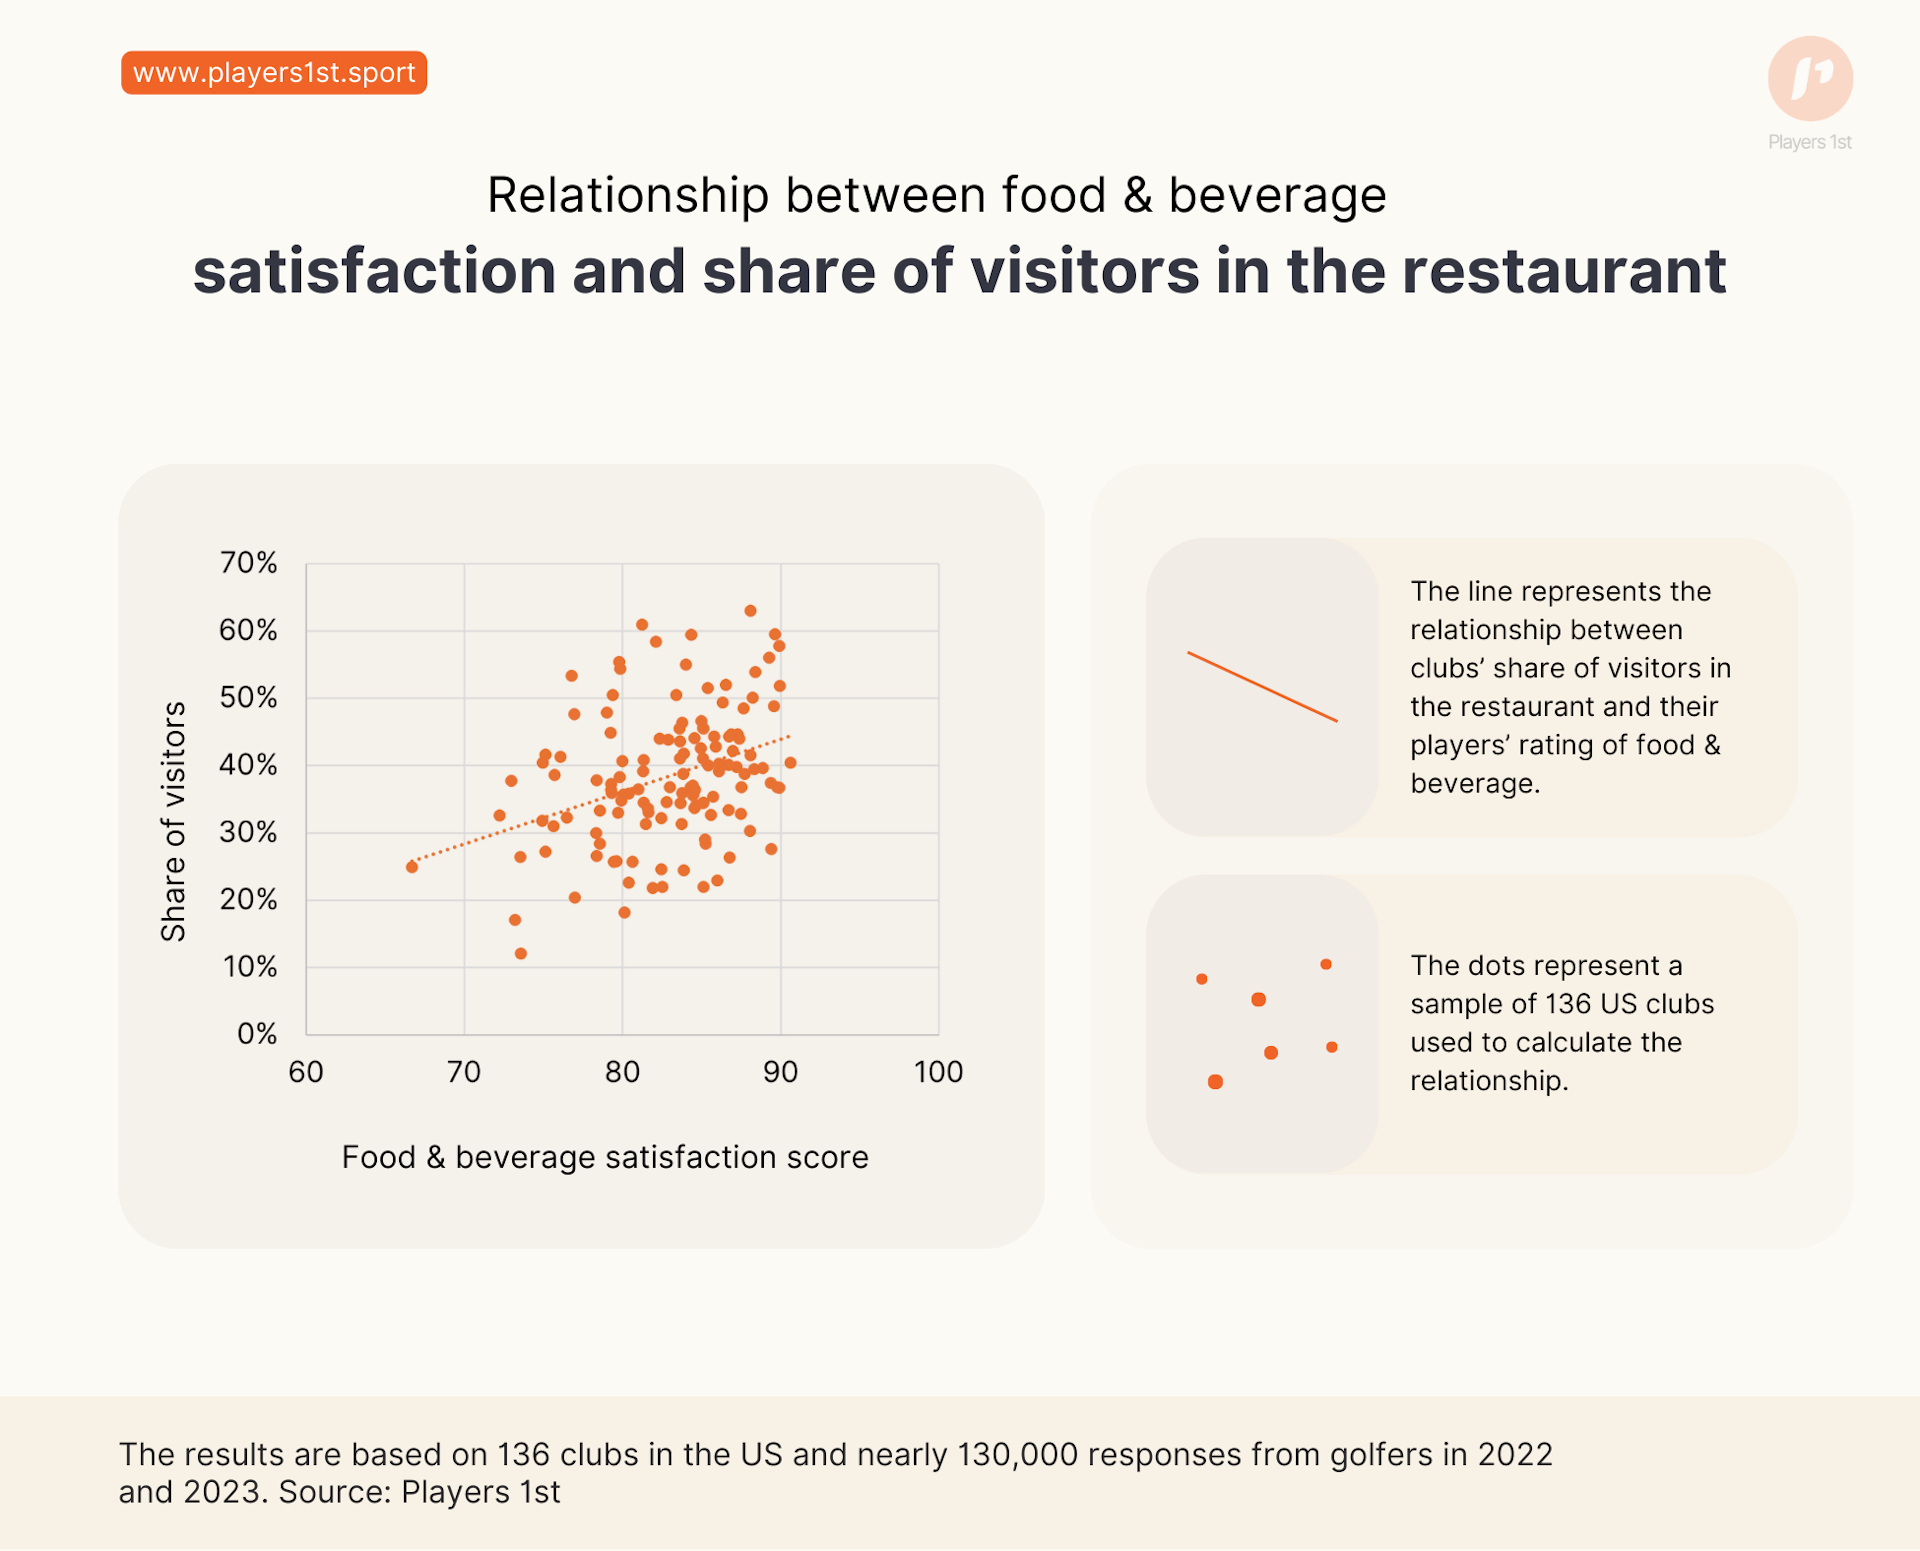 Figure 1: The relationship between clubs’ shares of visitors in the restaurant and their players’ rating of food & beverage. The results are based on 136 clubs in the US and nearly 130.000 responses from golfers in 2022 and 2023. Source: Players 1st.